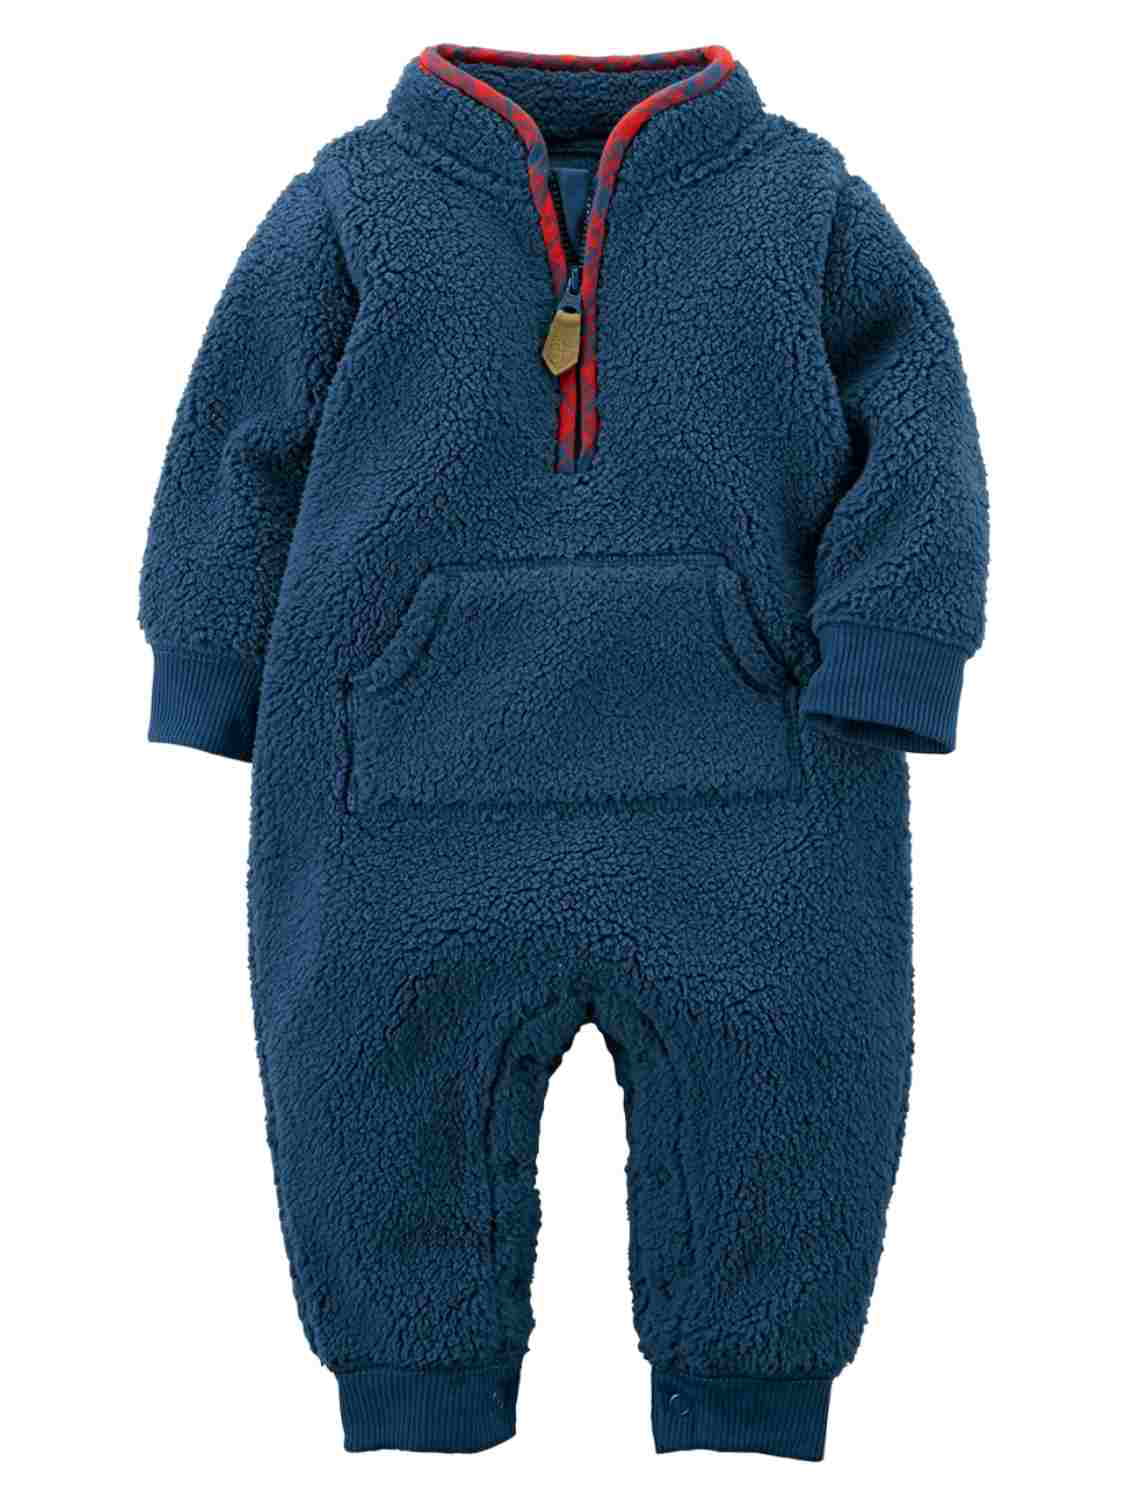 Carter's Carters Infant Boys Blue & Red Shepa Fleece Jumpsuit Coverall Baby Outfit 3m